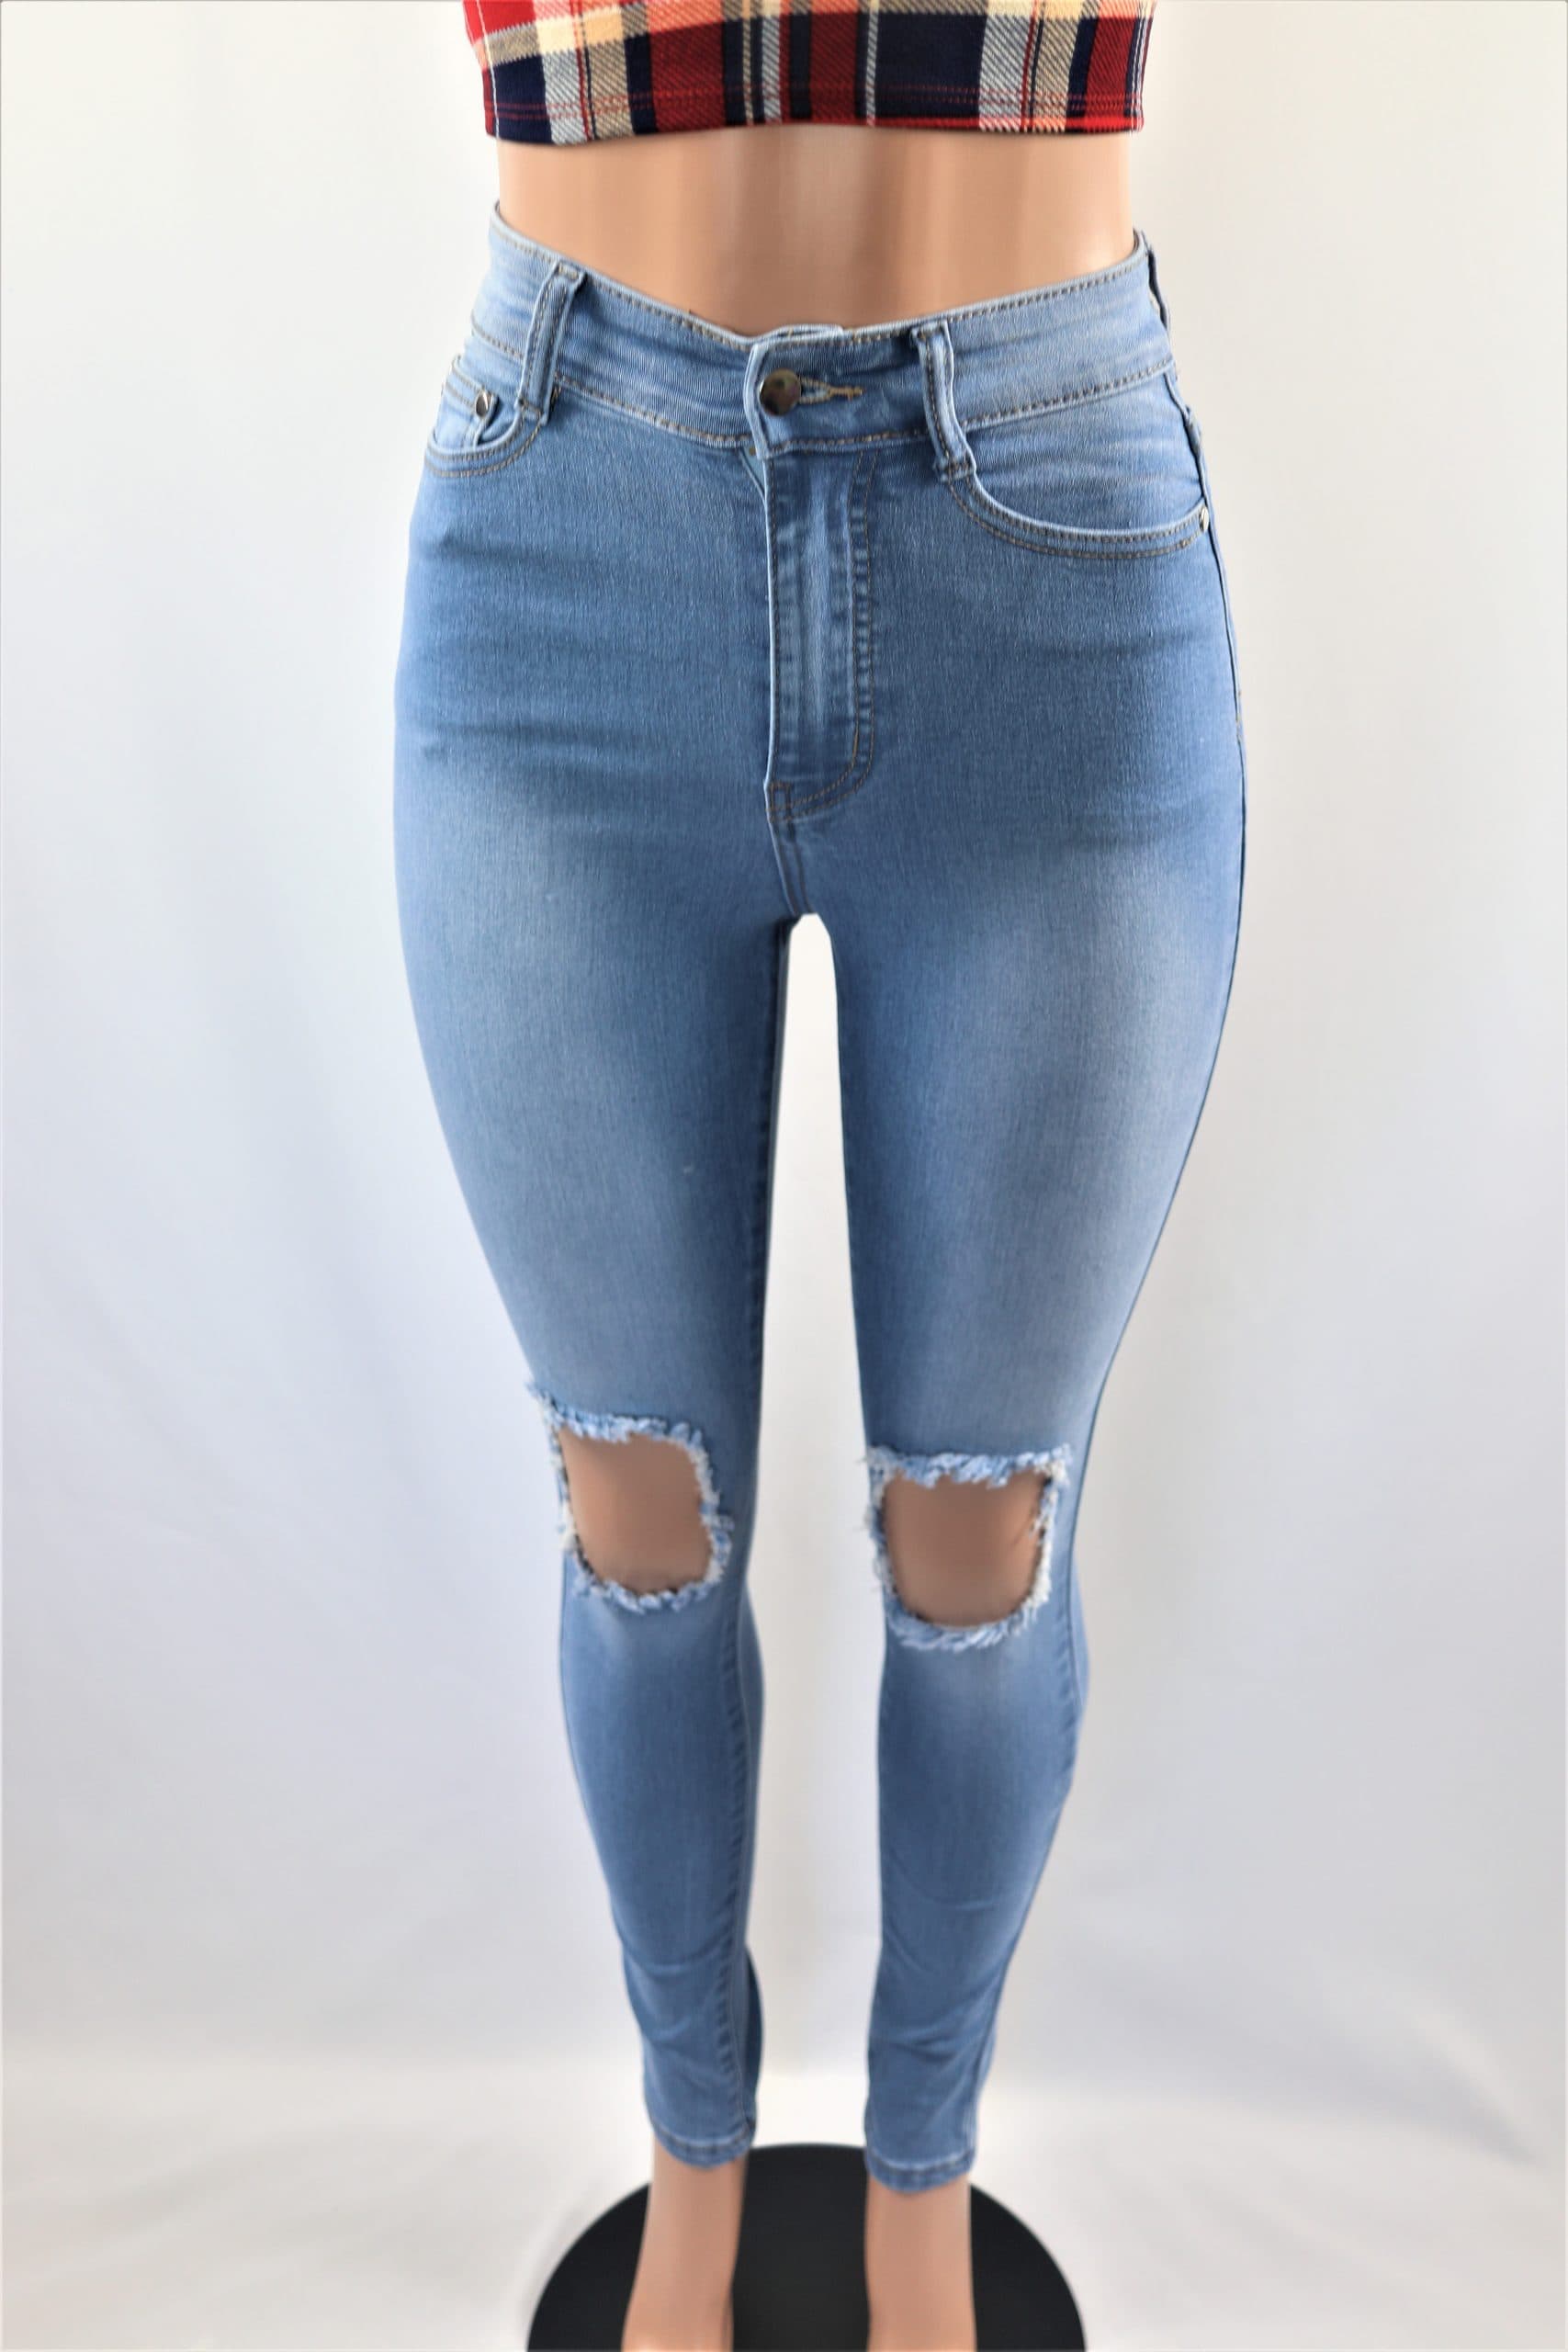 Logan Jeans - Light Blue was high waist ripped skinny jeans.